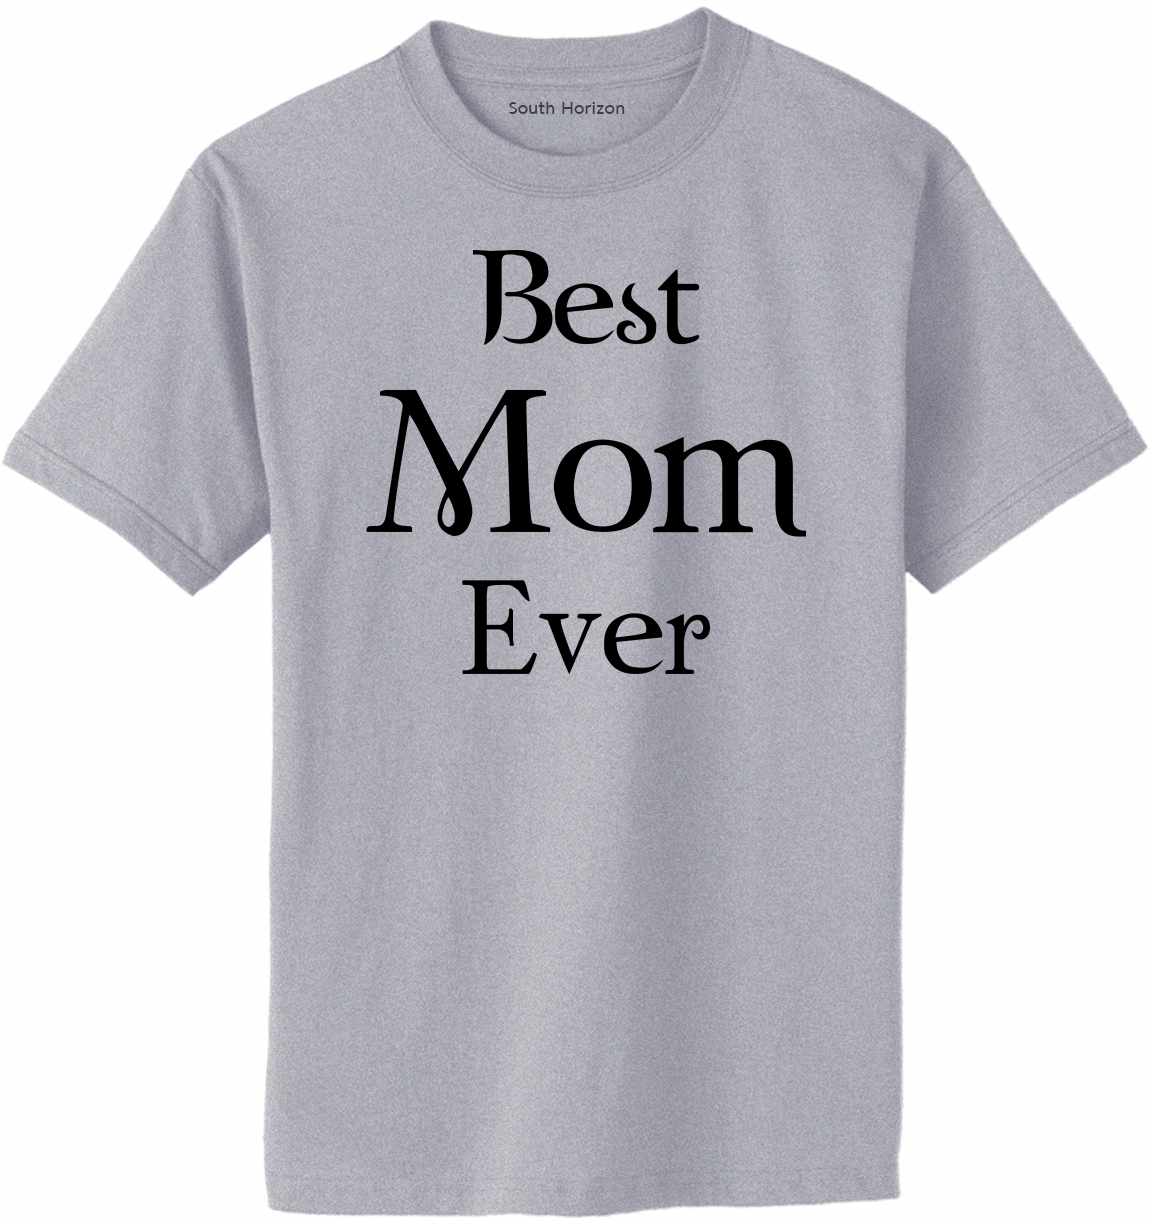 Best Mom Ever Adult T-Shirt (#1071-1)